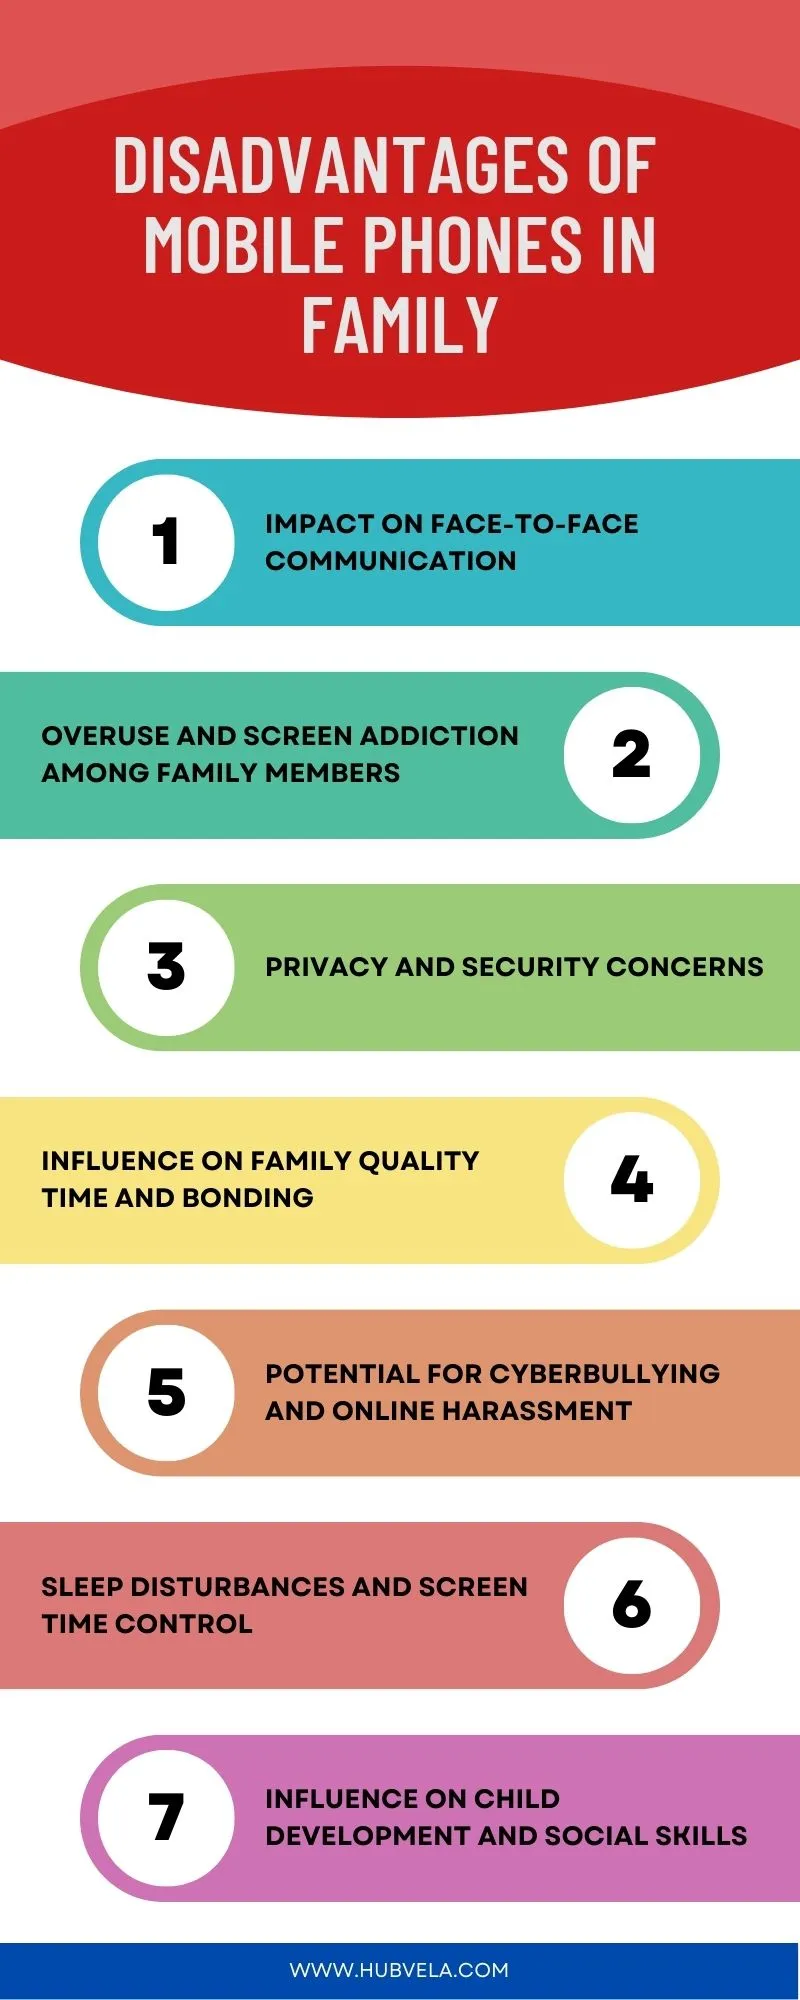 Disadvantages of Mobile Phones in Family Infographic